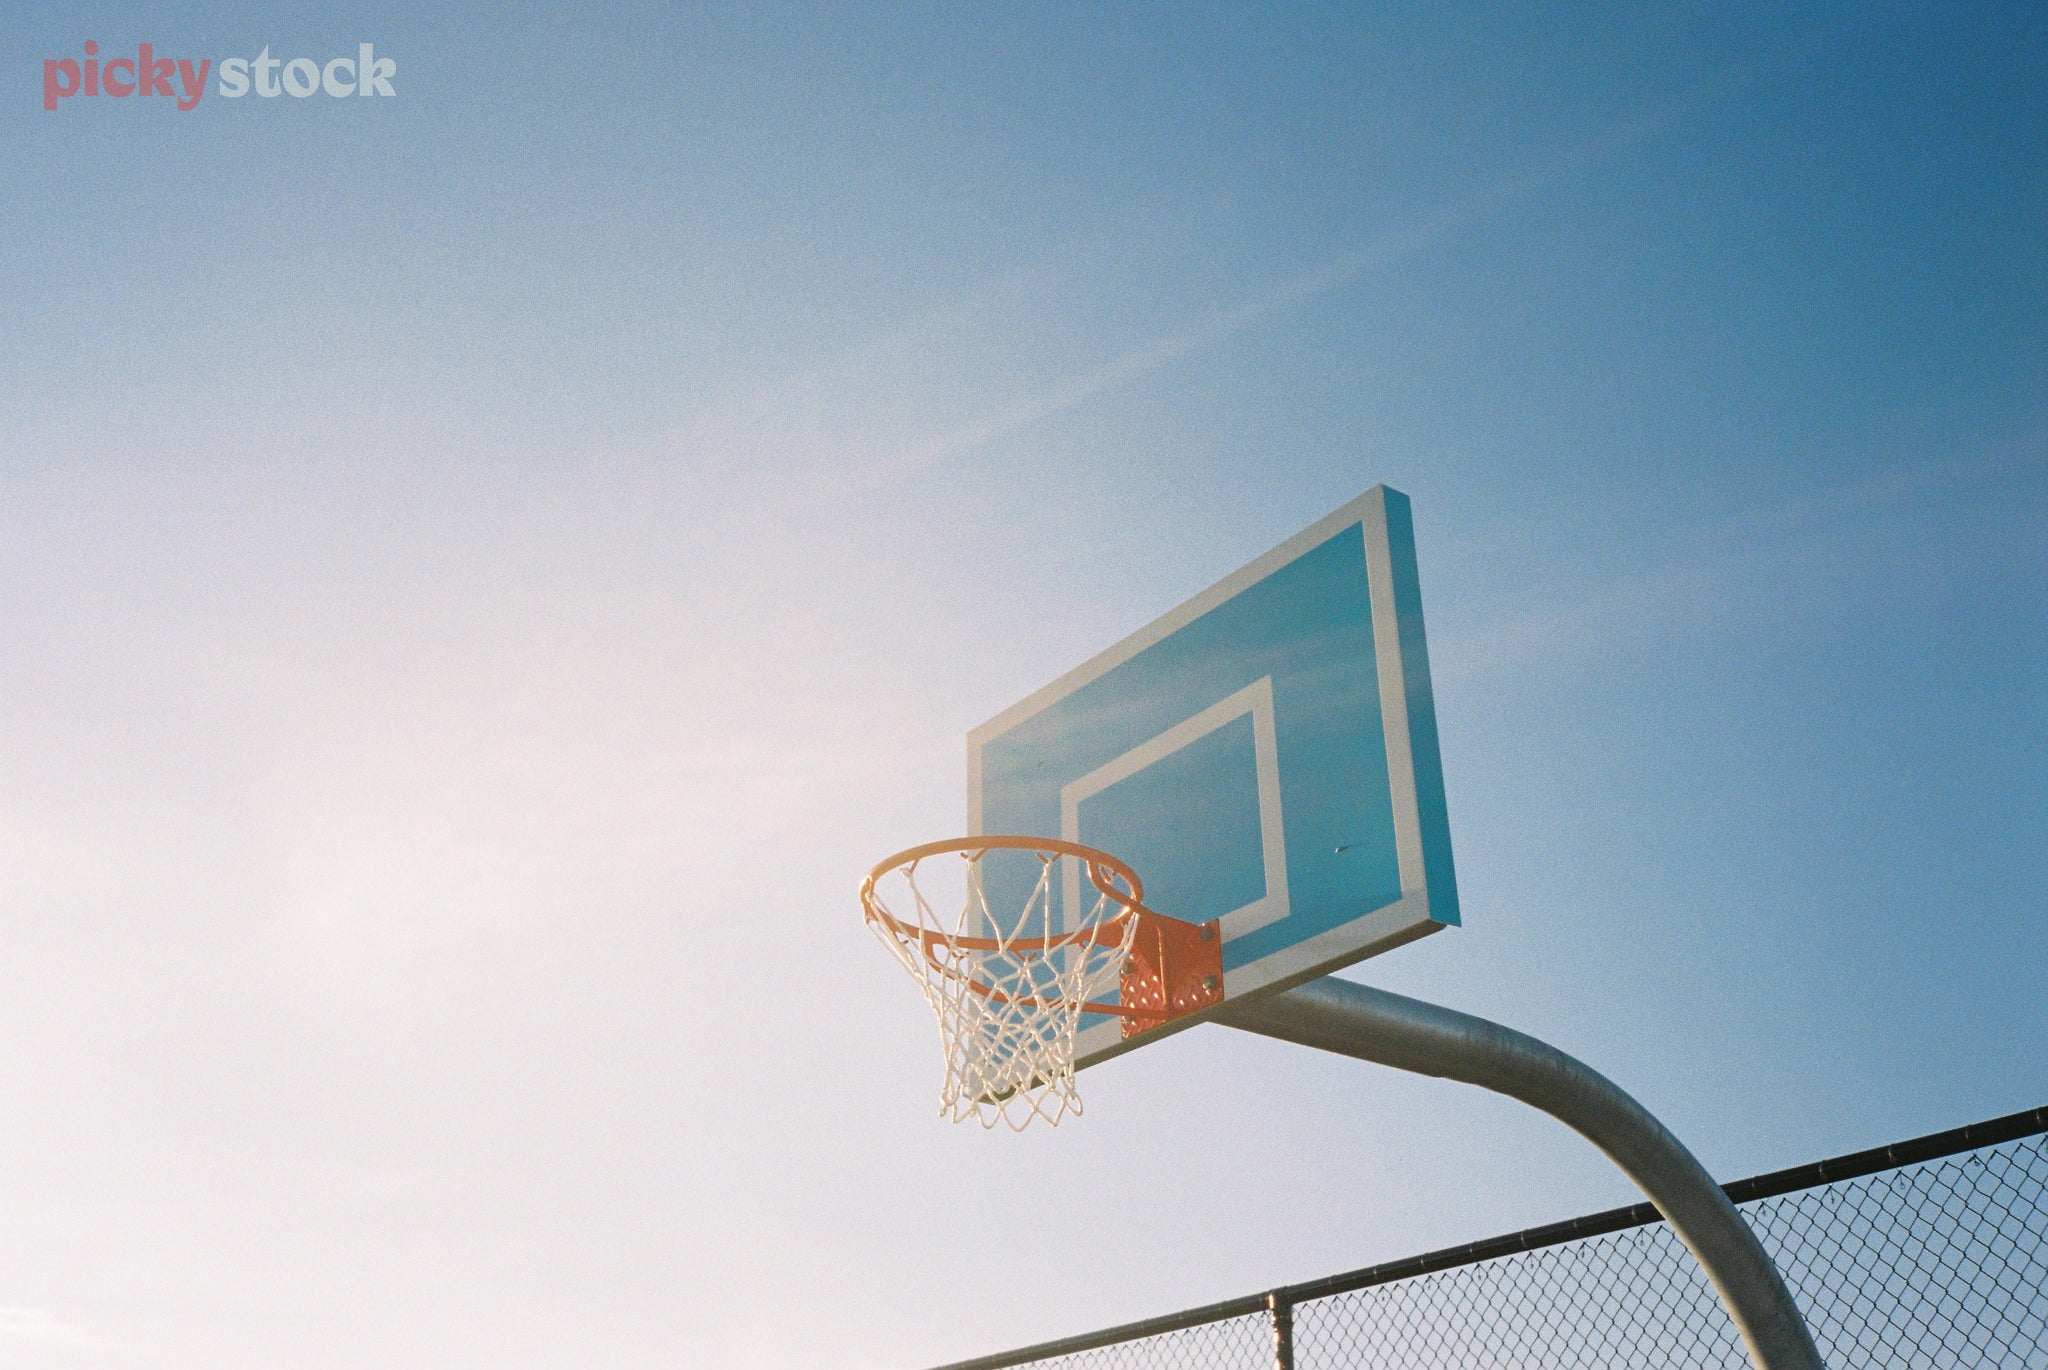 Looking upwards towards a blue basketball hoop on a bright blue day. 